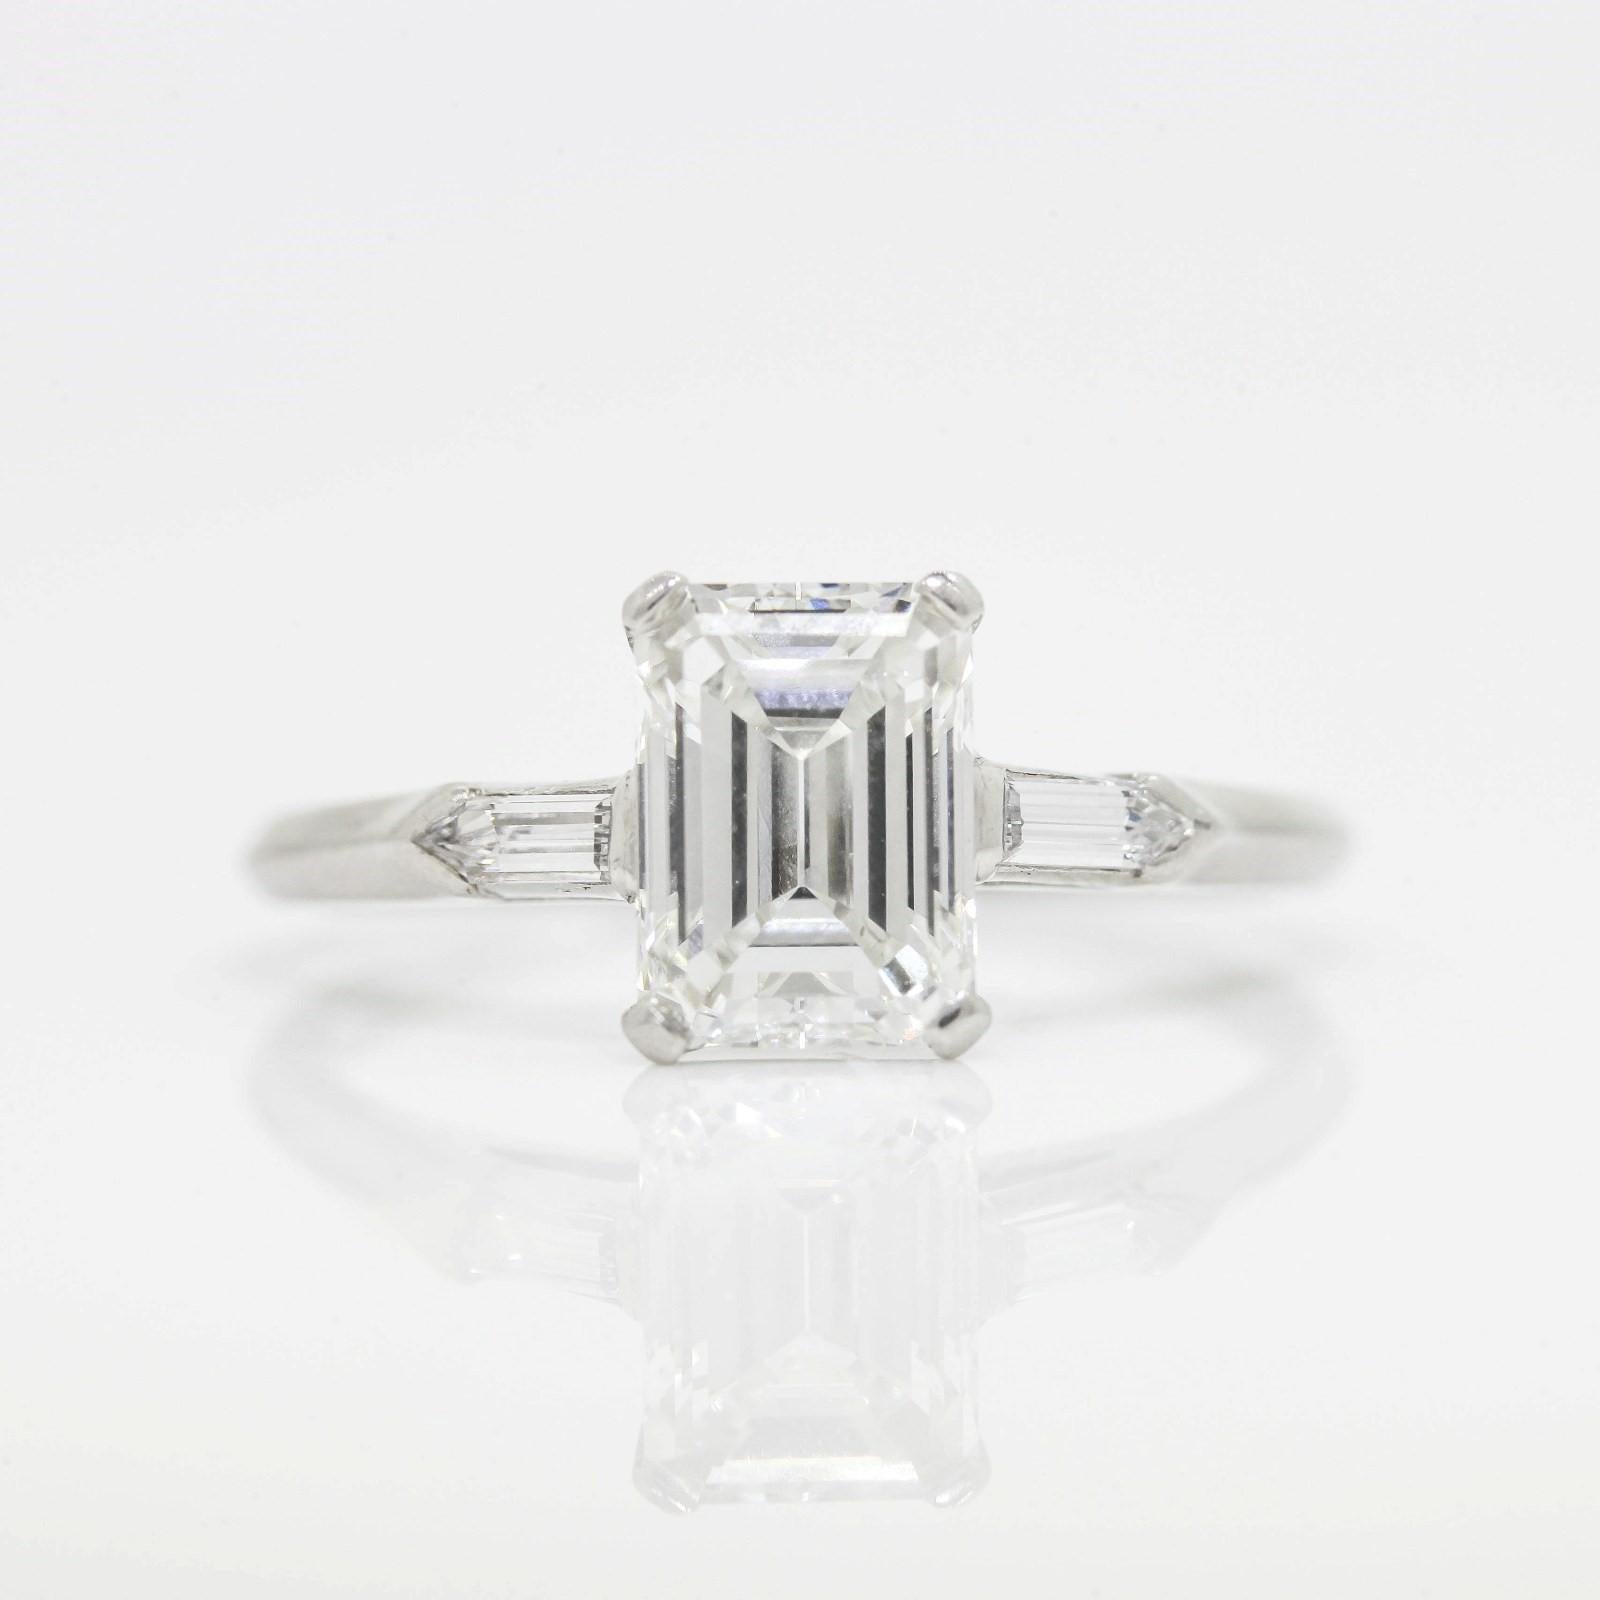 Classic vintage simplicity!   A platinum ring featuring a G.I.A. certified 1.44 carat Emerald Cut Diamond, accompanied by Report #5191830806 stating diamond is H color - VS1 clarity.  The four prong double wire basket setting is accented with two